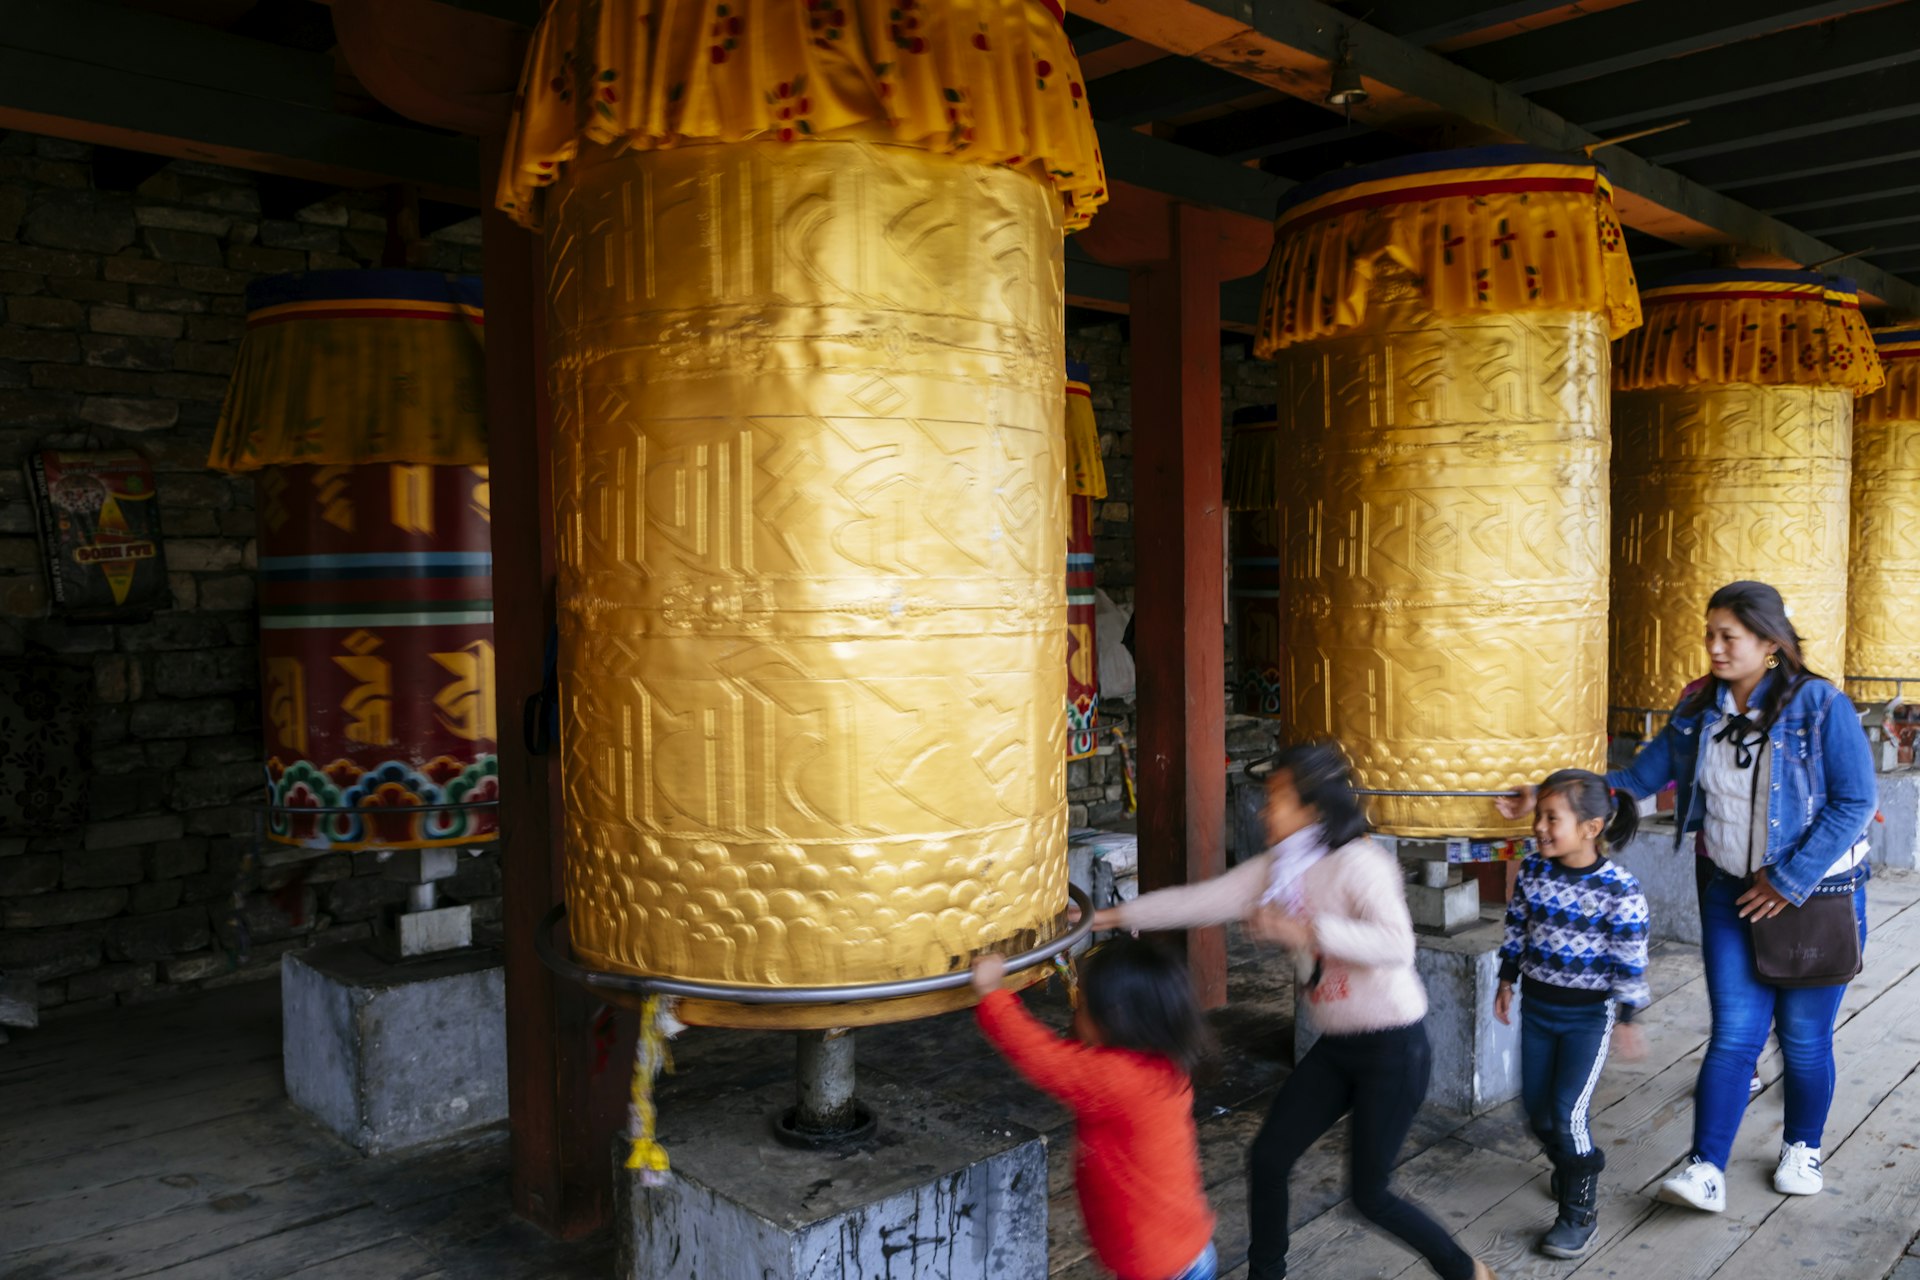 A woman and three young children spinning a prayer wheel at the Tibetan-style National Memorial Chorten, one of the most visible religious structures in Thimphu.